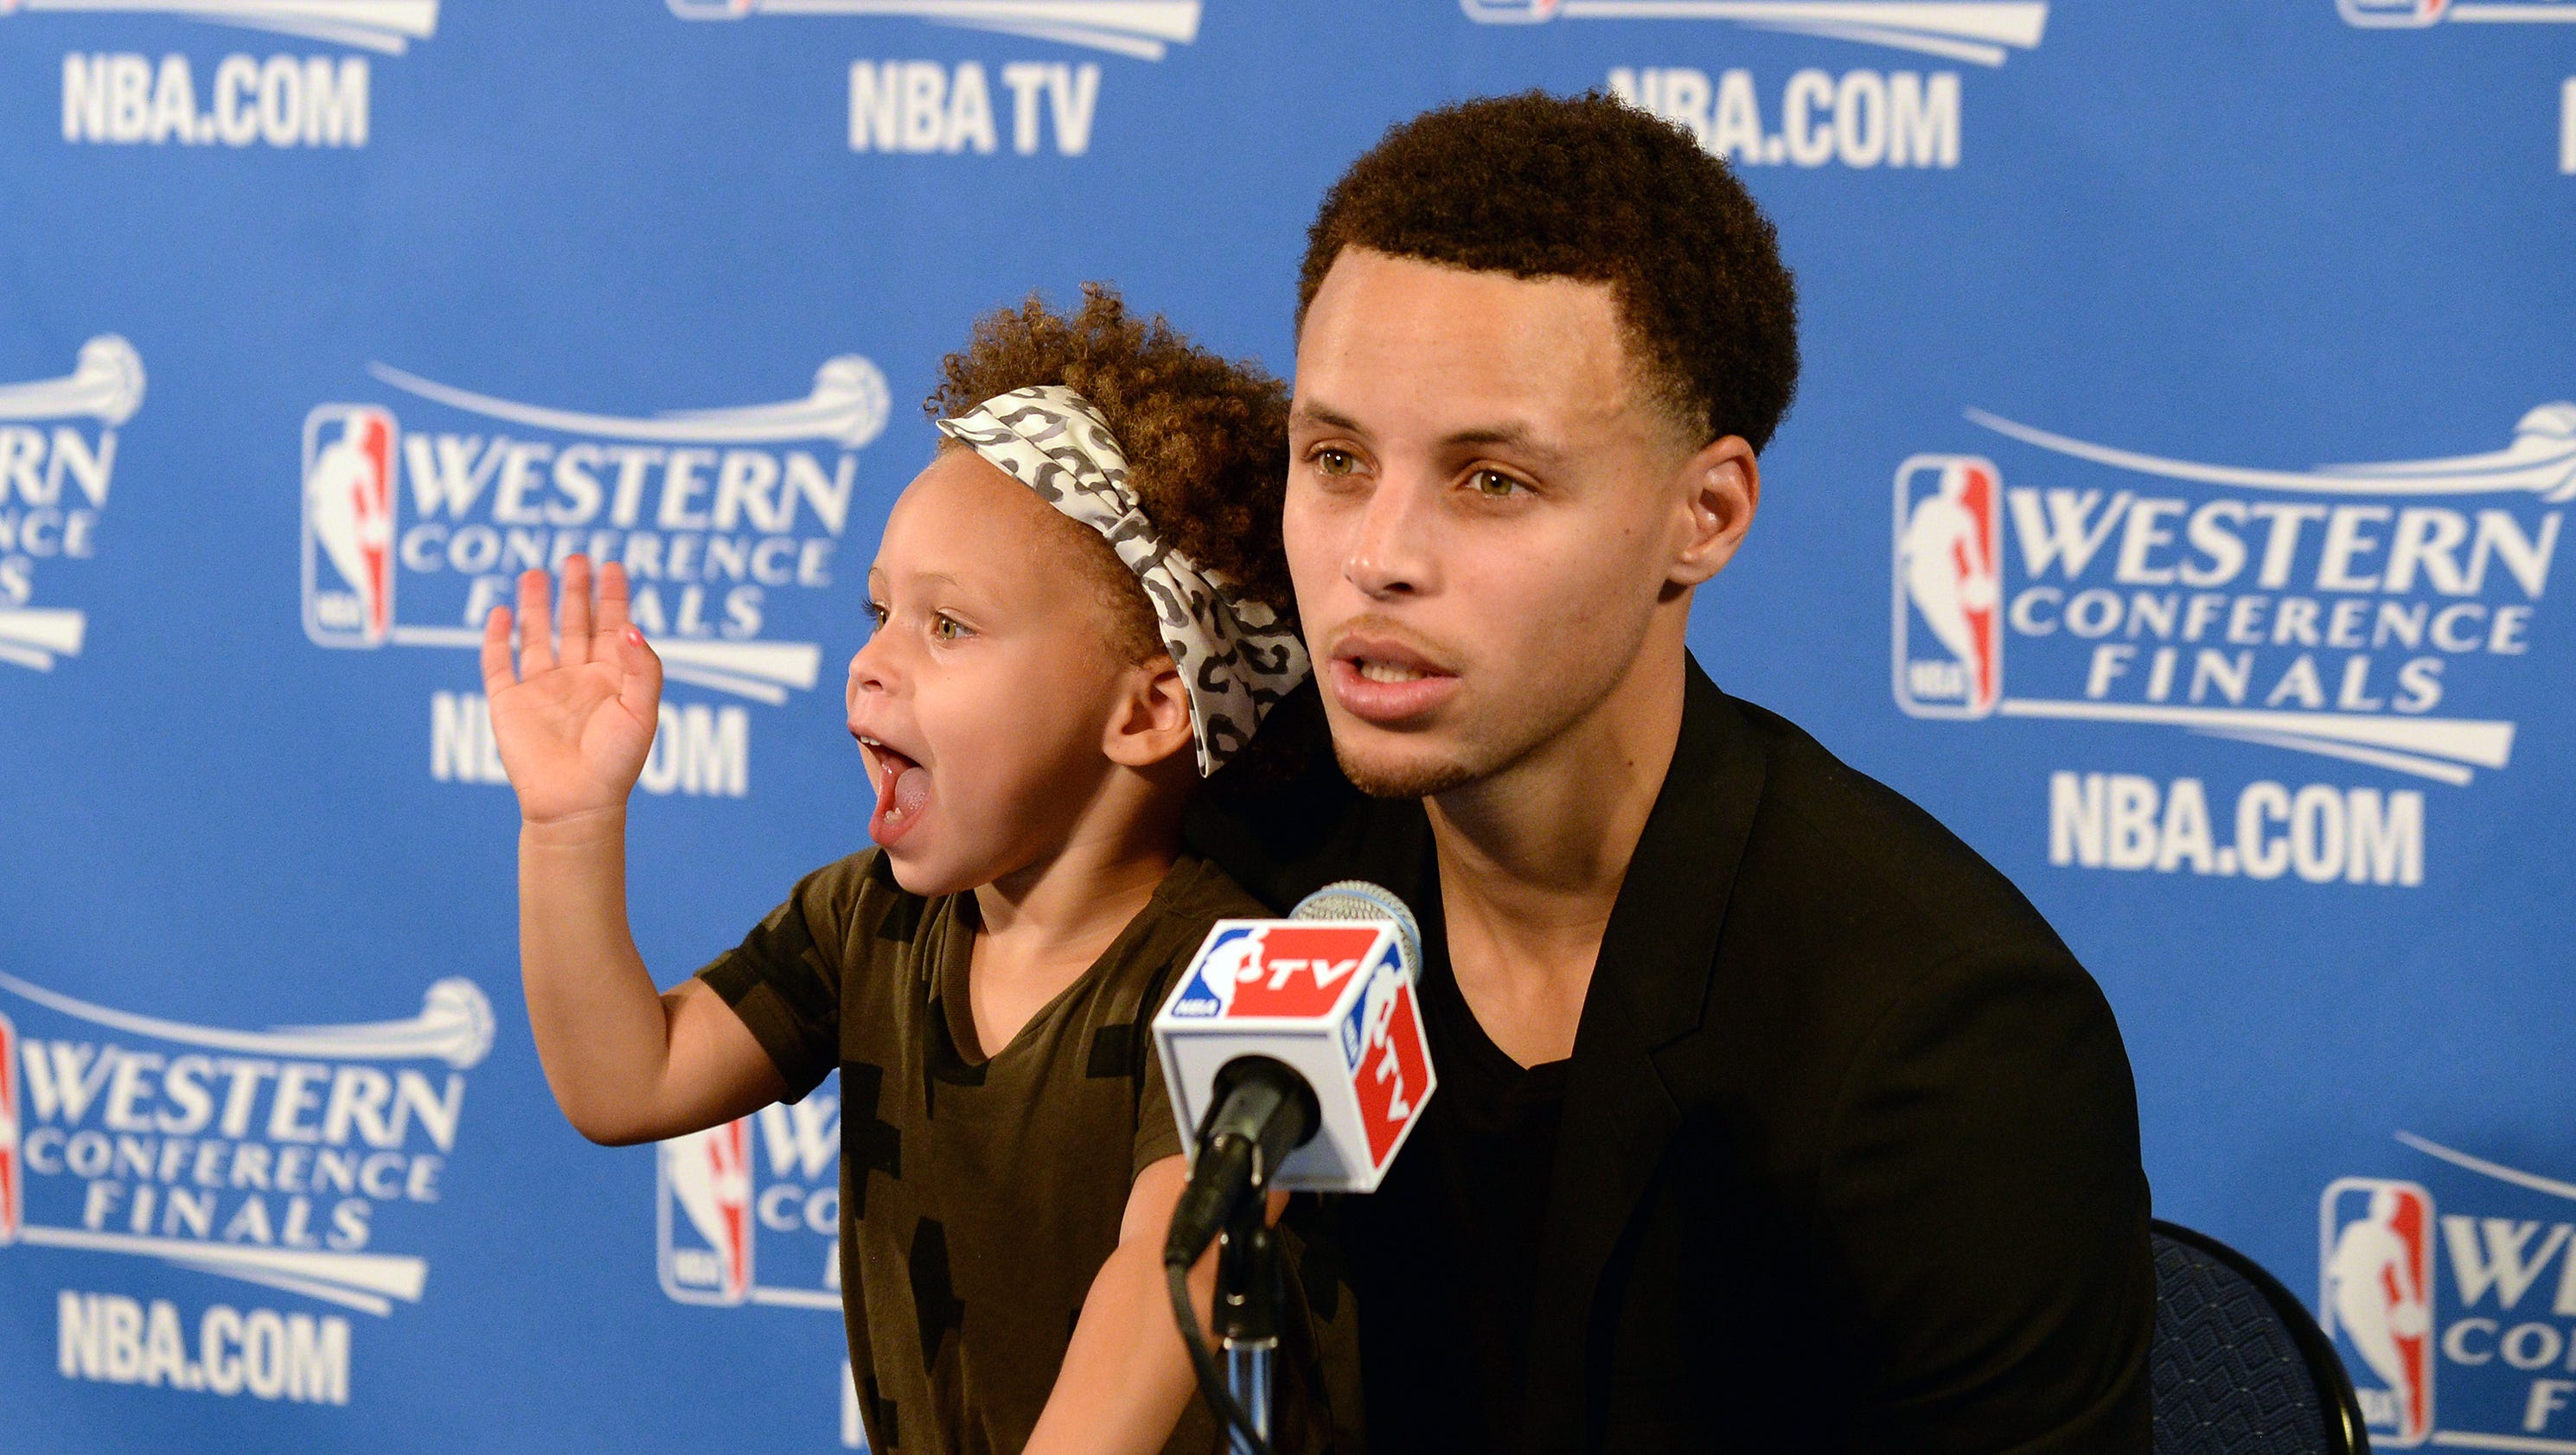 Why is there an issue with kids at postgame press conferences?